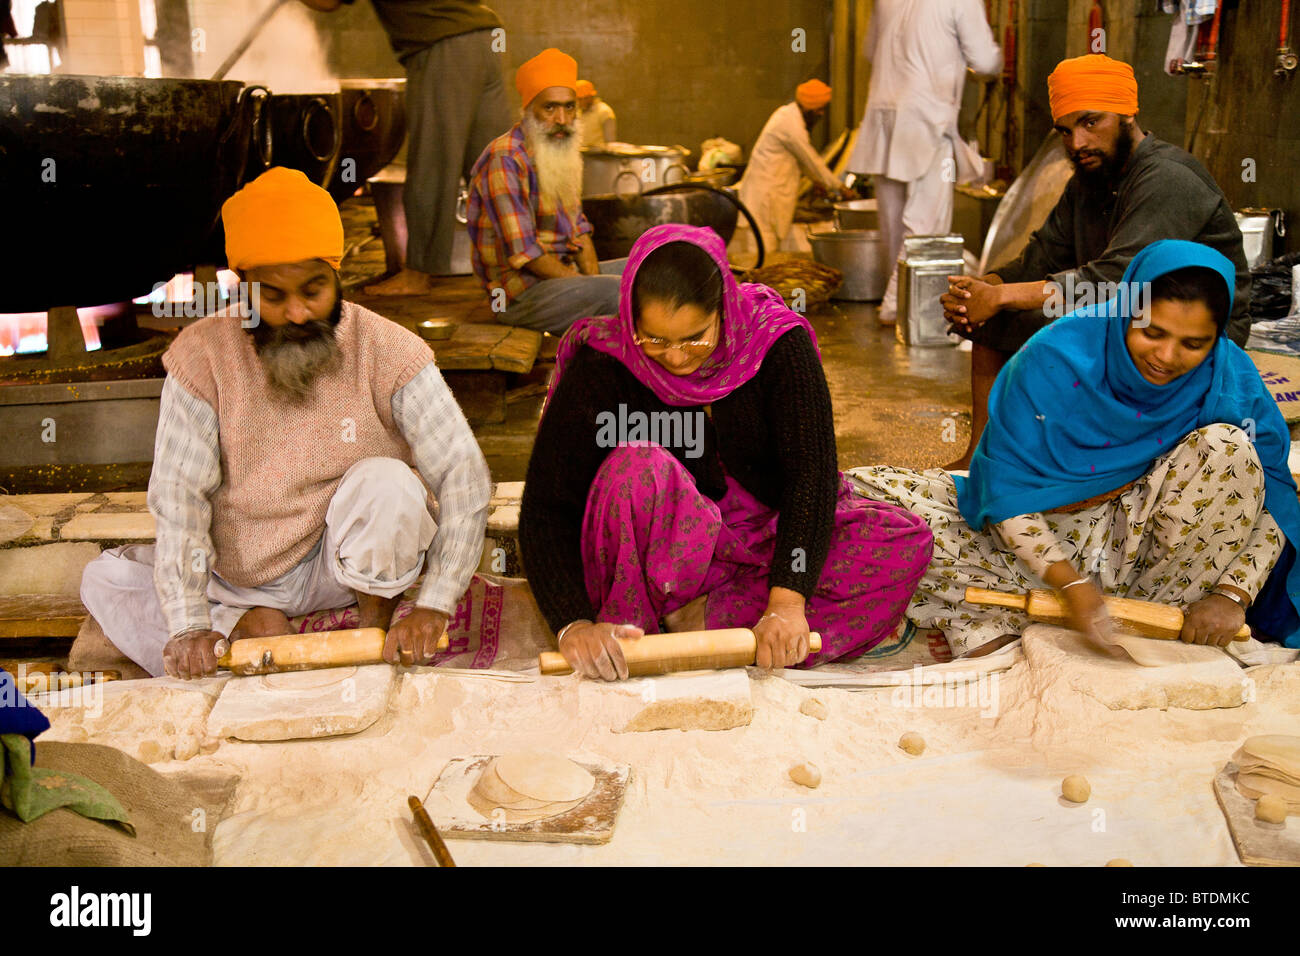 Dozens of volunteers help out as cooks and Chapati makers at the Golden Temple's kitchen, Amritsar, Punjab, India Stock Photo